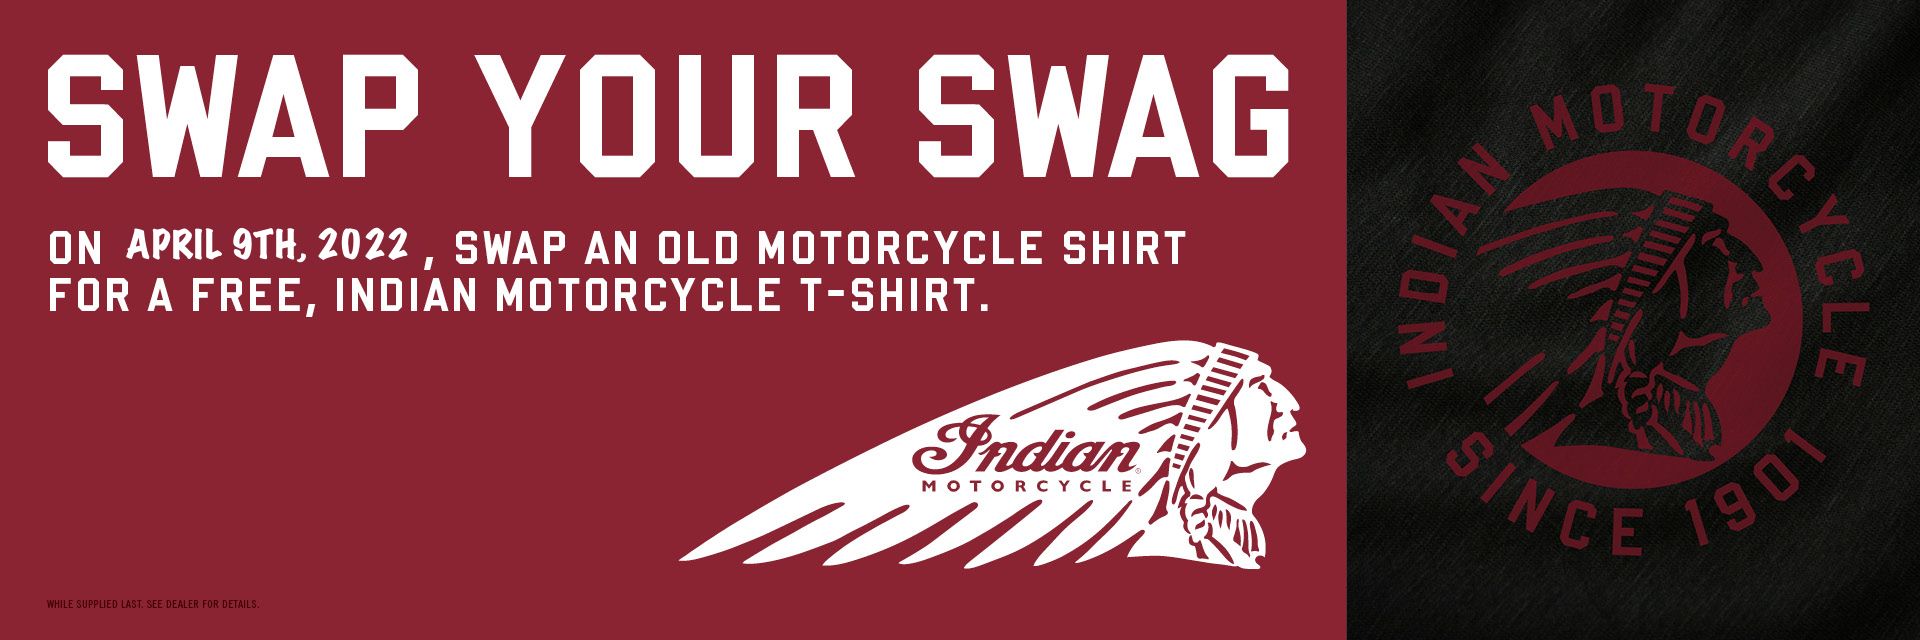 A view of the swap your swag event that is being held by indian motorcycles